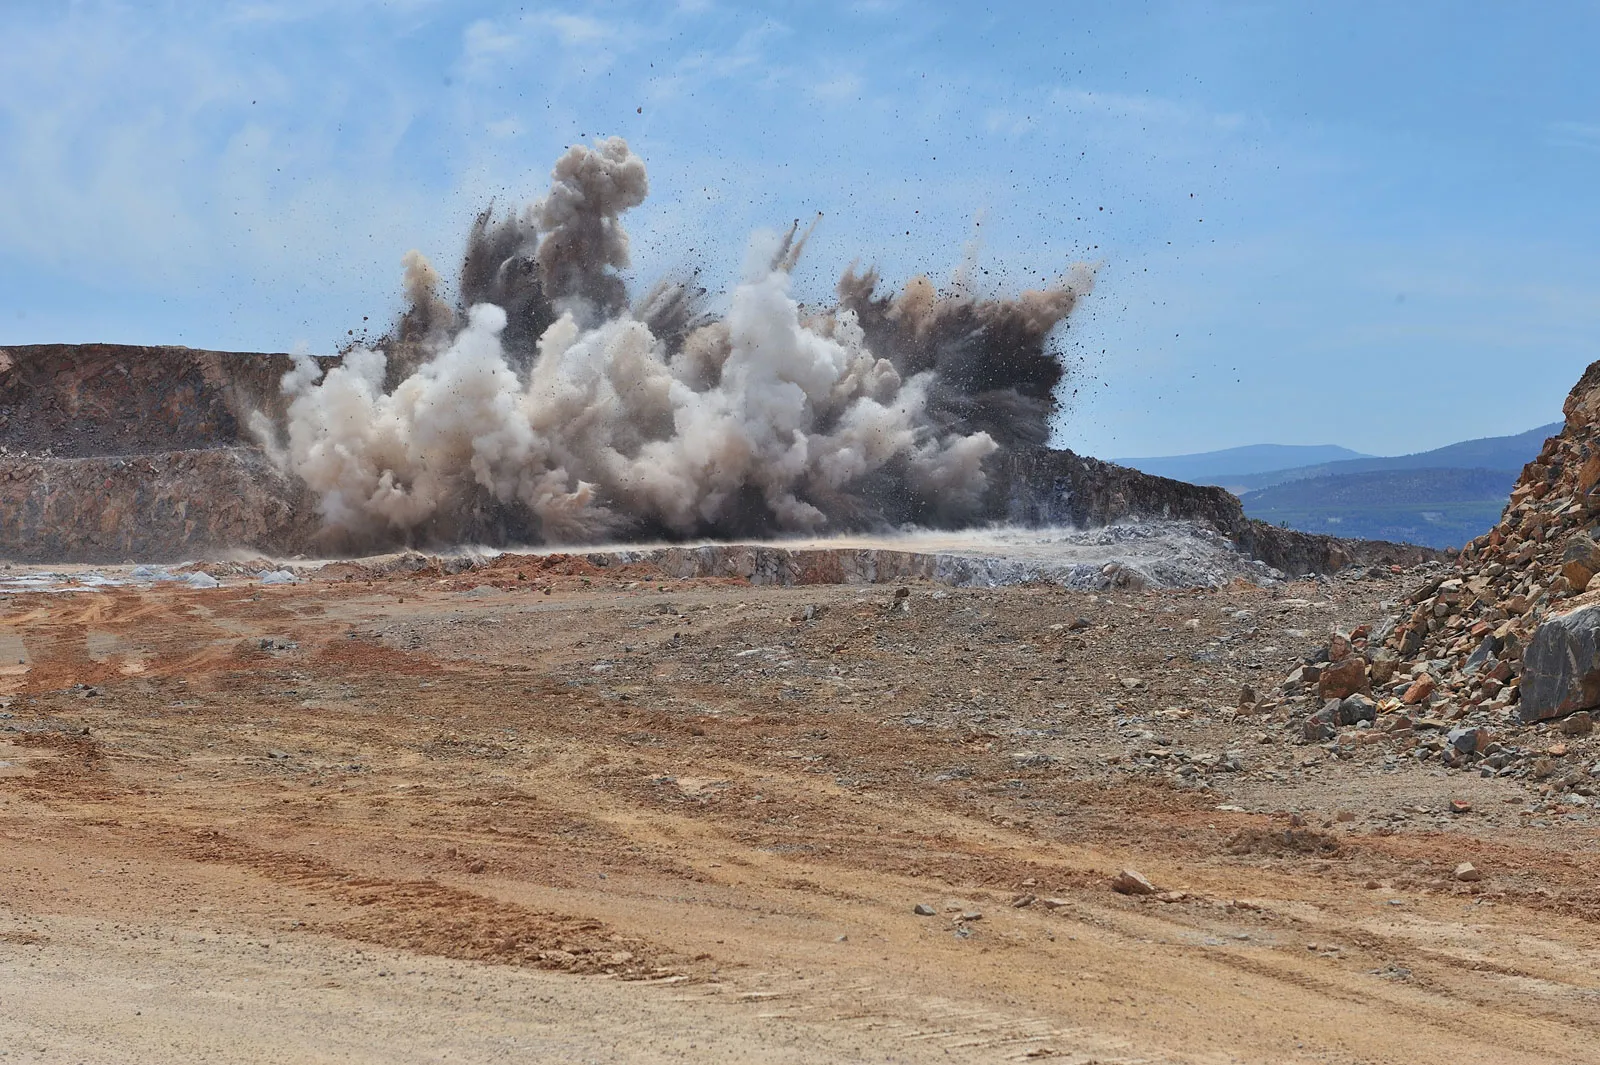 Rock blasting and fracturing